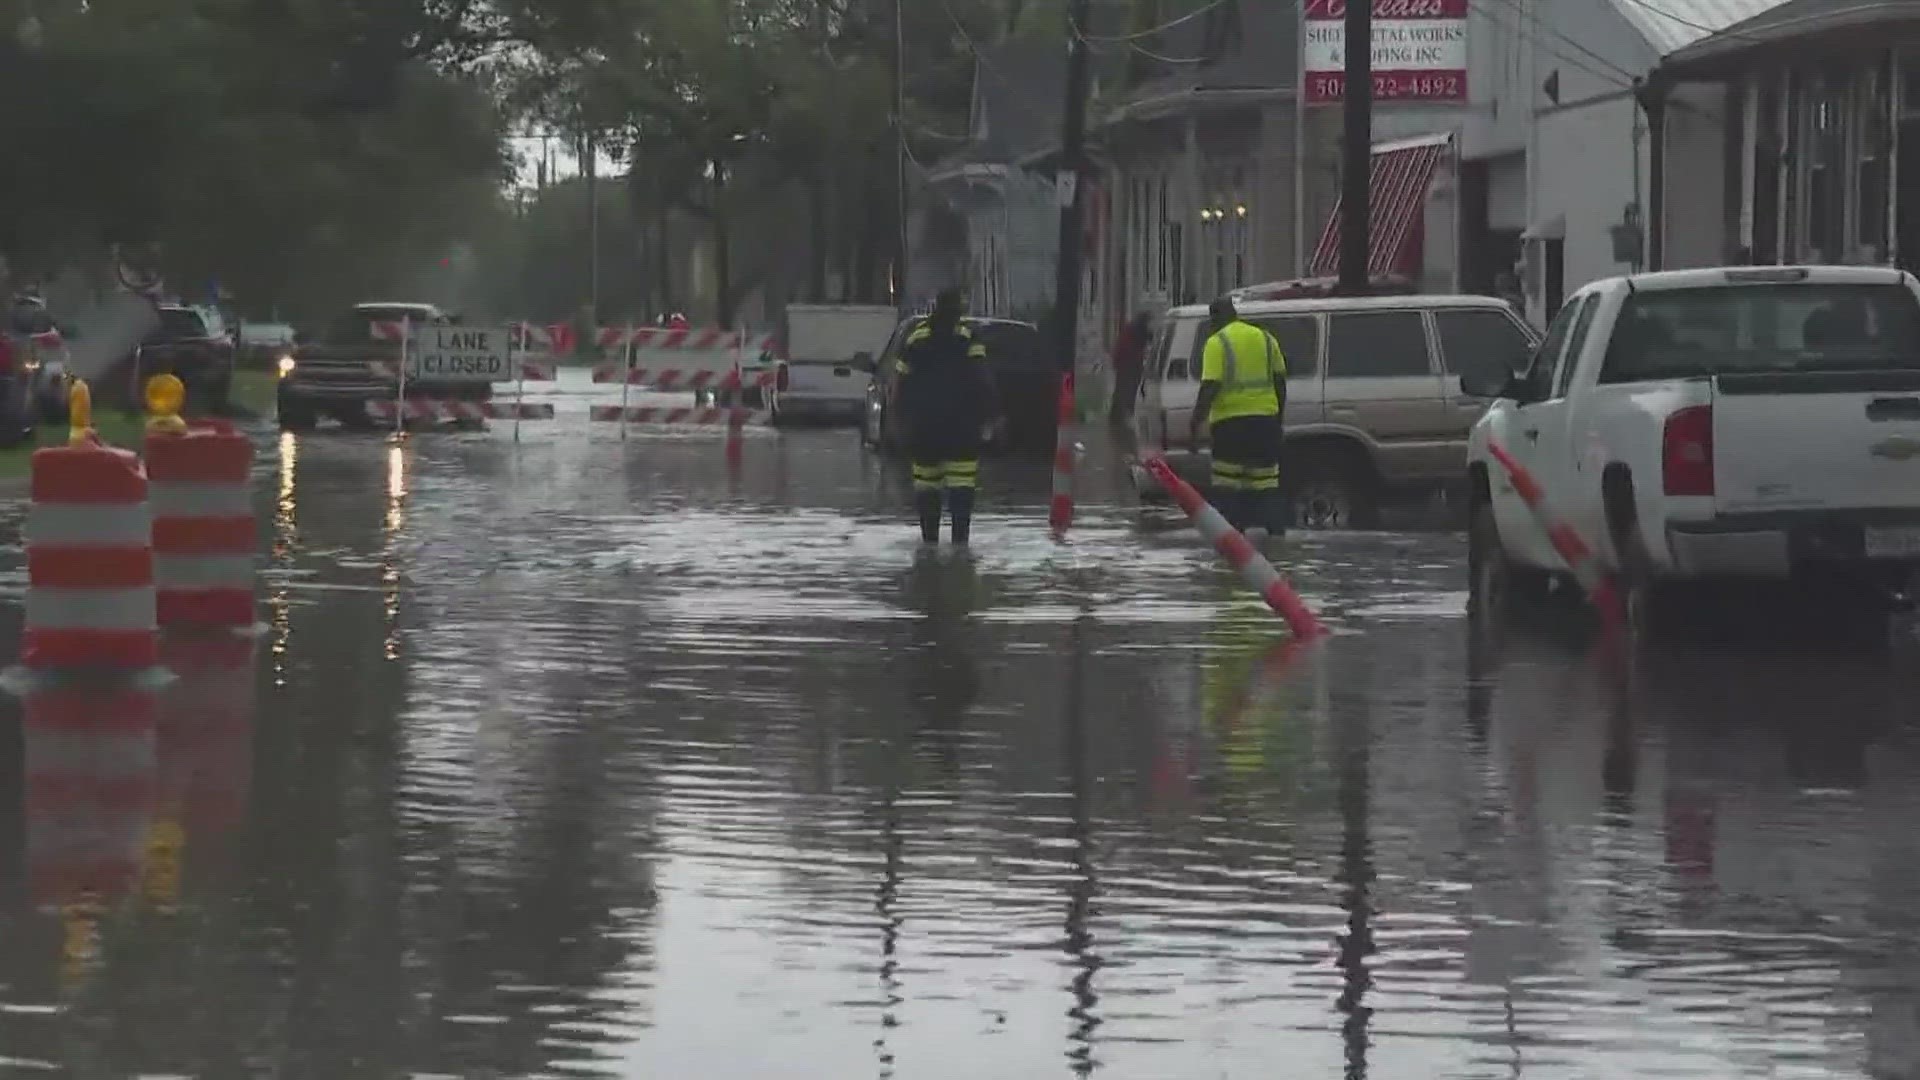 From thunderstorm warnings to flash flood alerts, some roads in New Orleans were impassable Wednesday.